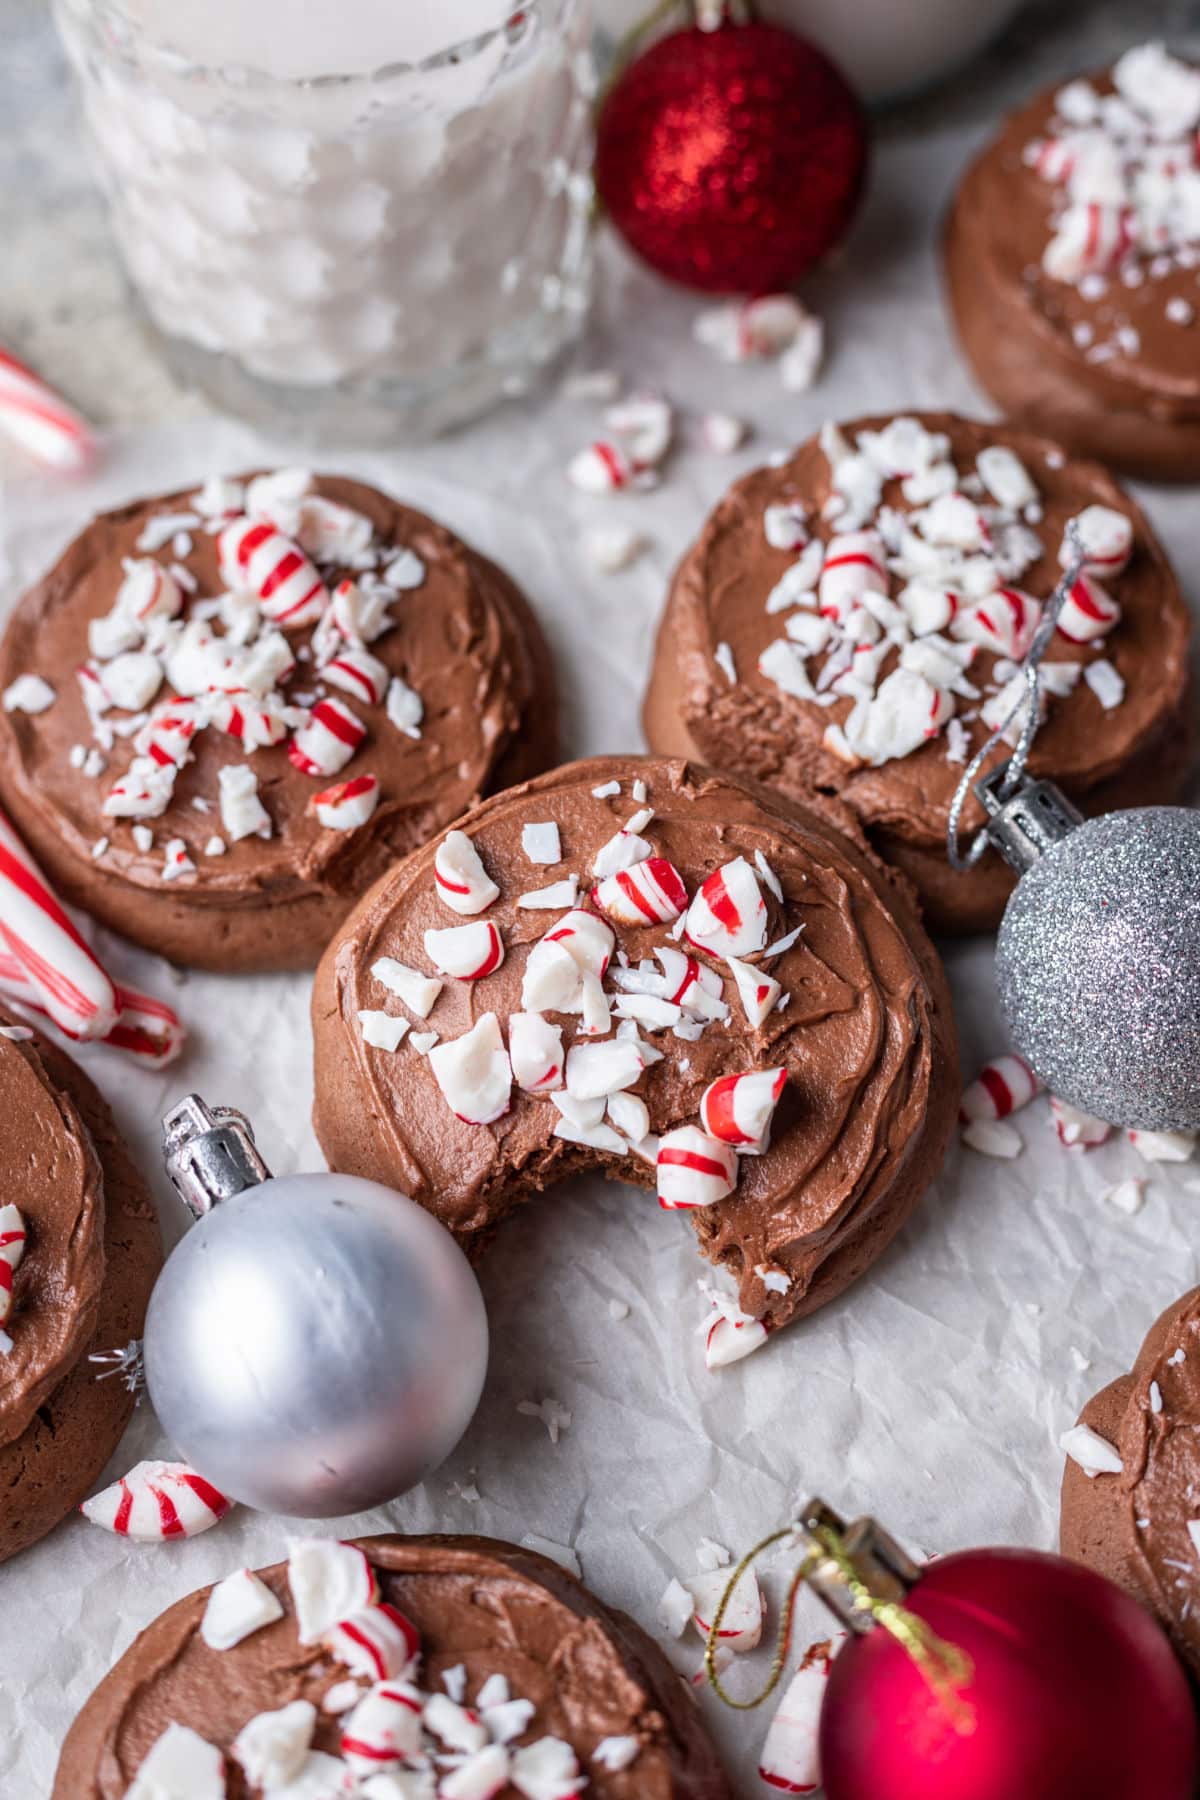 Chocolate frosted peppermint cookies surrounded by candy canes and ornaments.